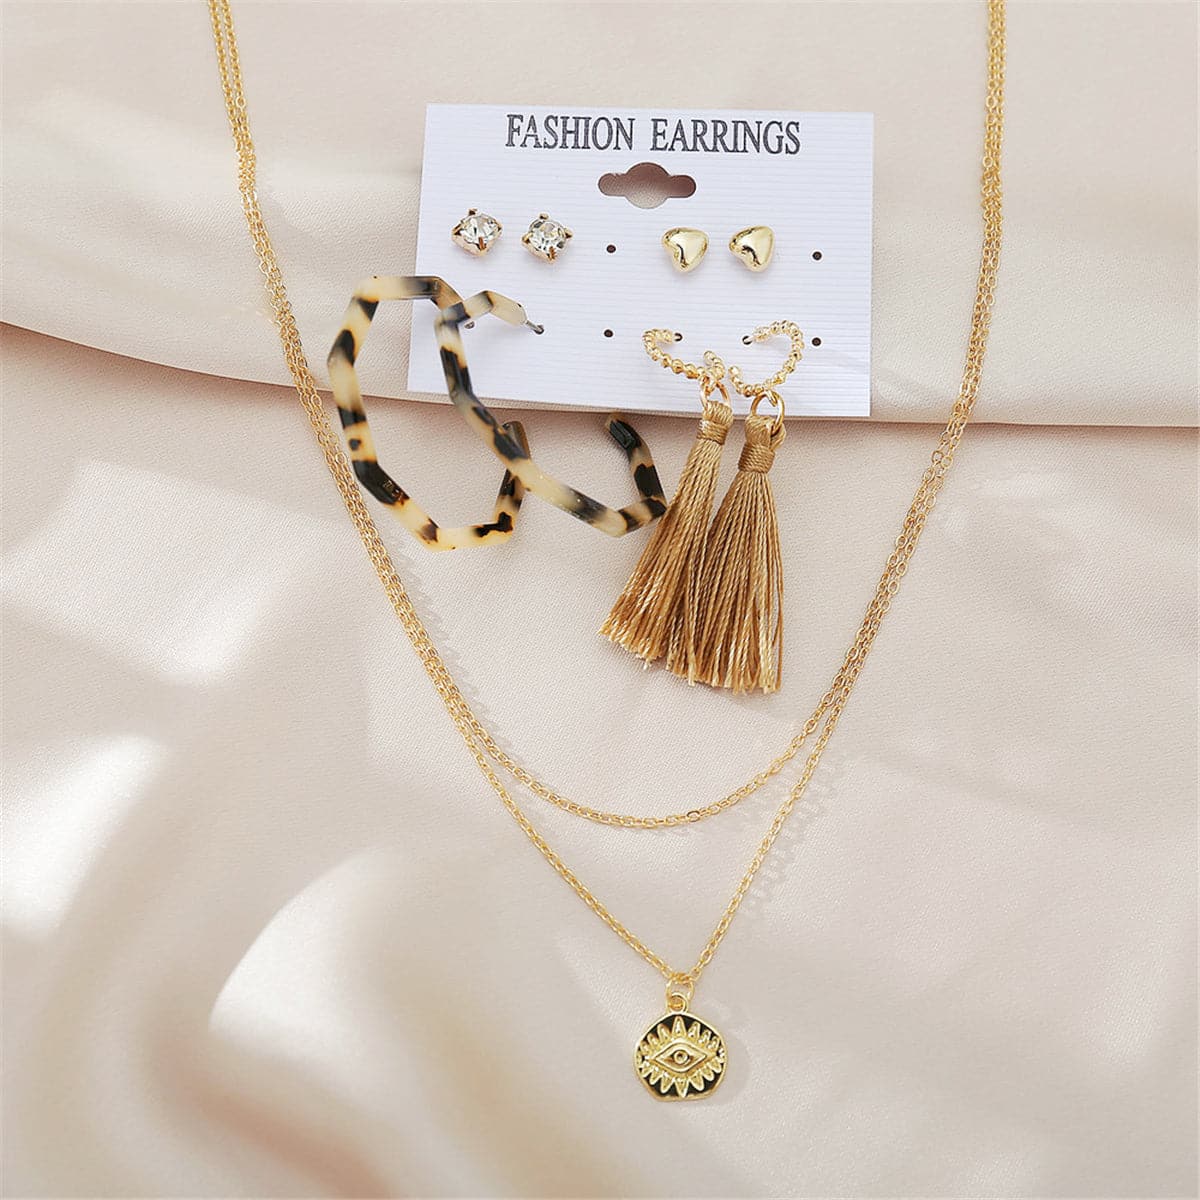 Cubic Zirconia & 18K Gold-Plated Earrings & Layered Pendant Necklace Set